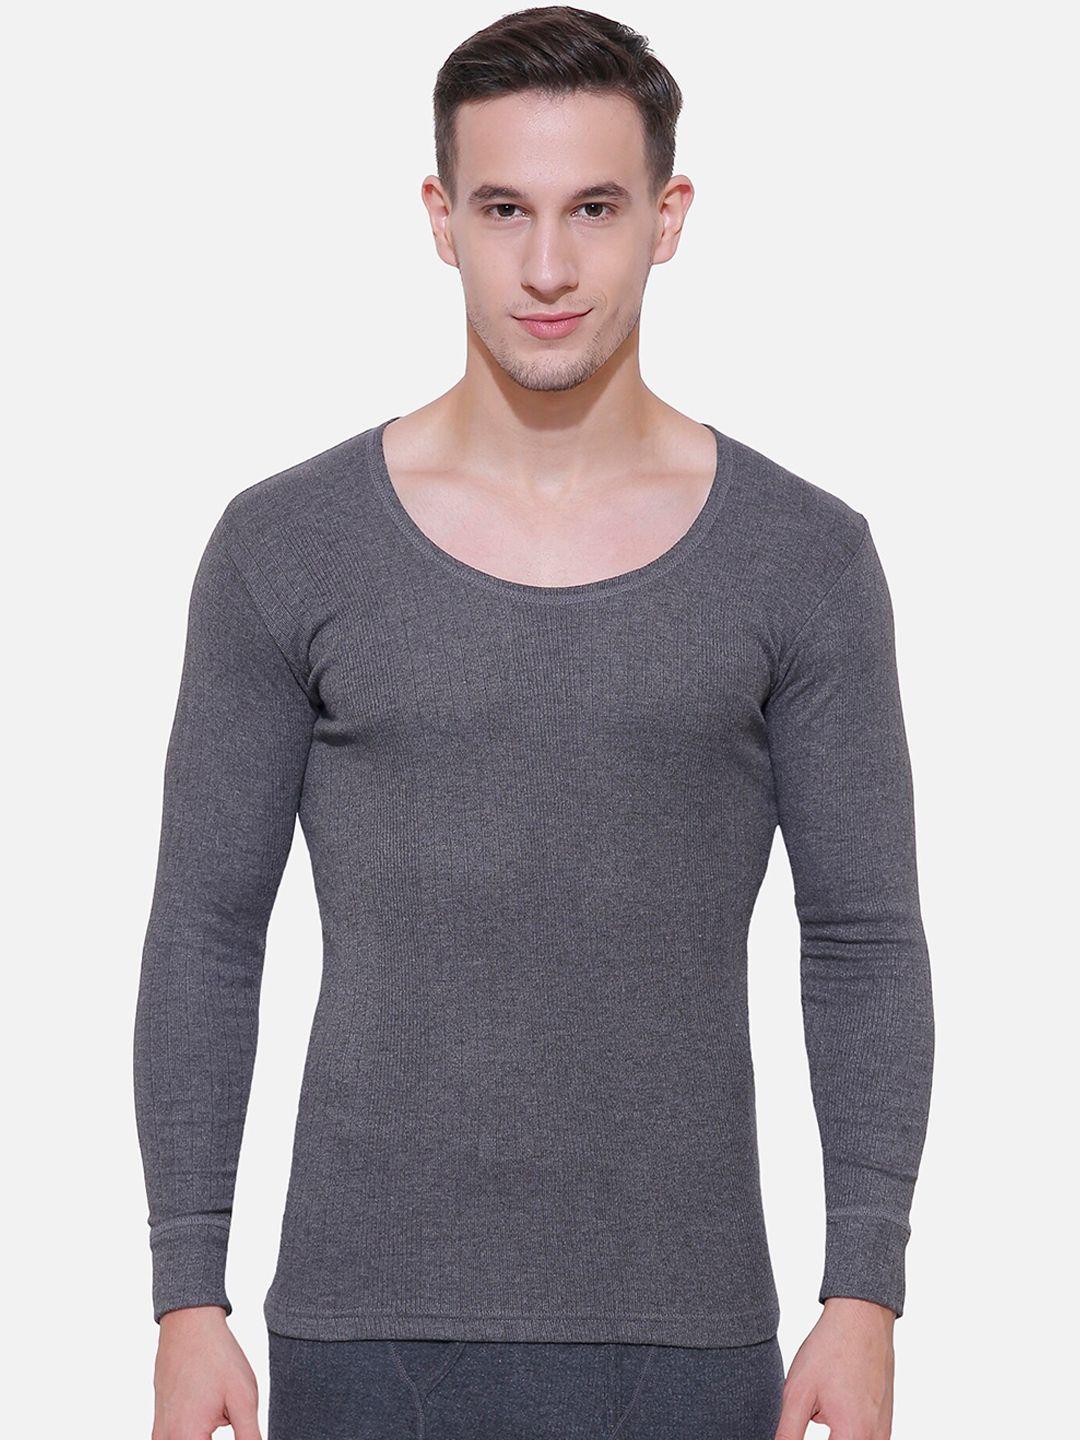 bodycare-insider-men-charcoal-grey-striped-slim-fit-thermal-top